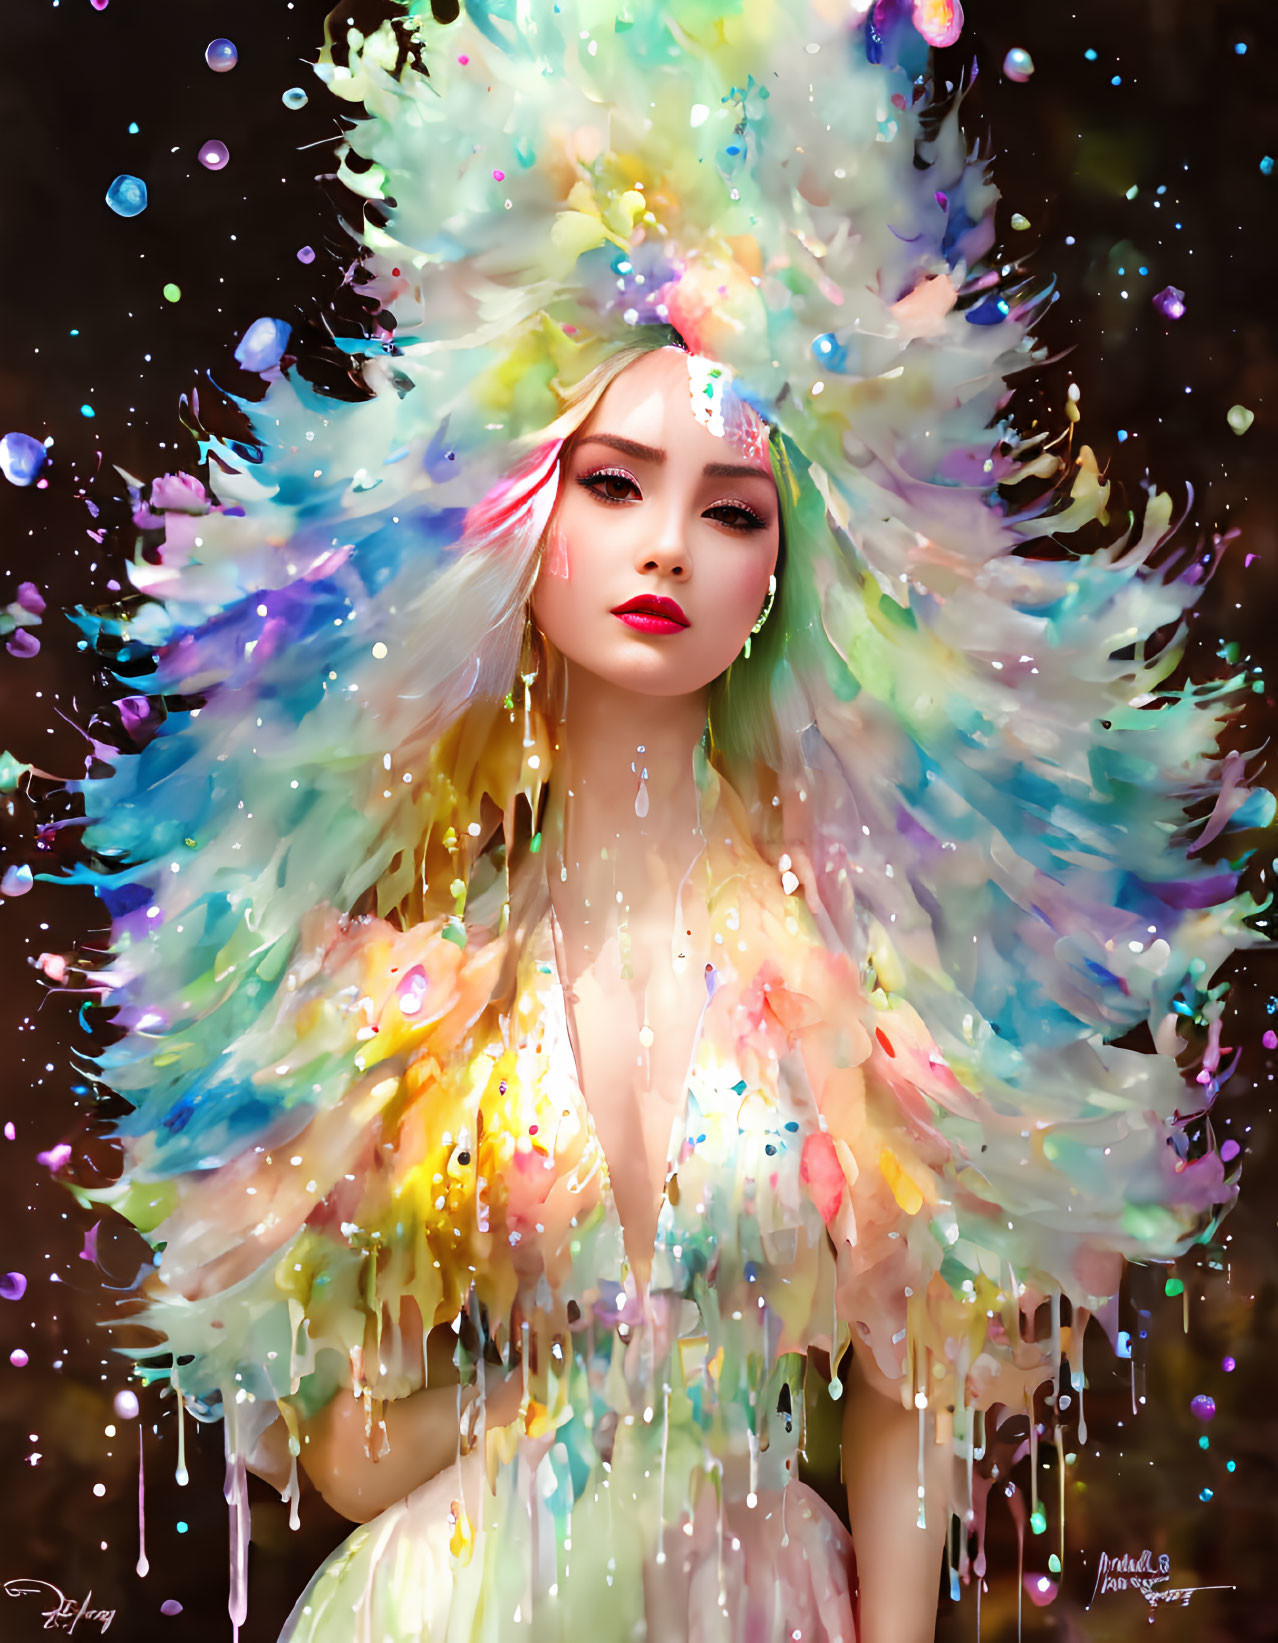 Colorful streaked paint-like hairstyle on a woman with striking makeup and mystical attire